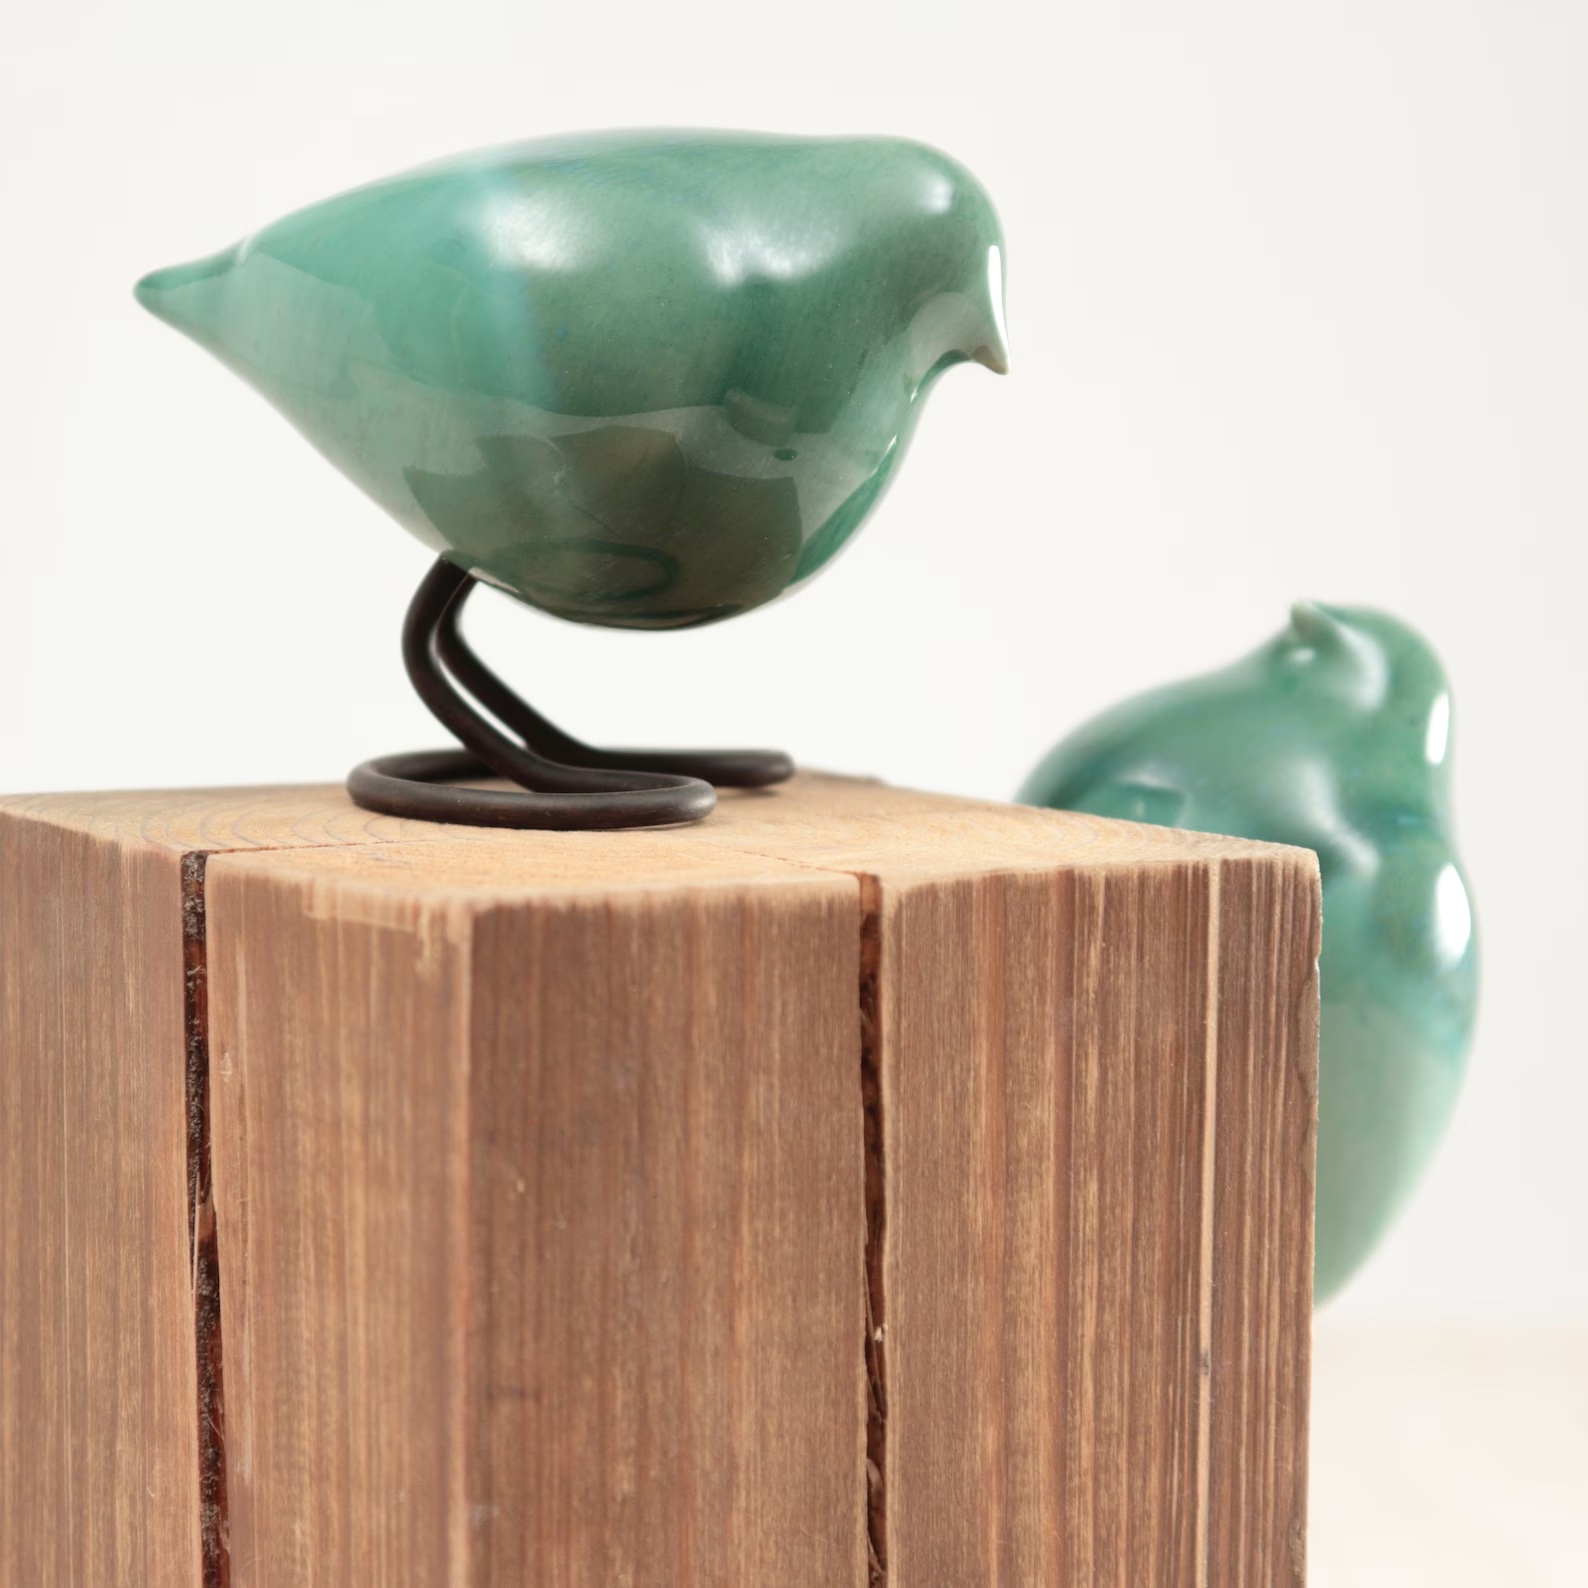 A green ceramic bird to show what can look good with white decor